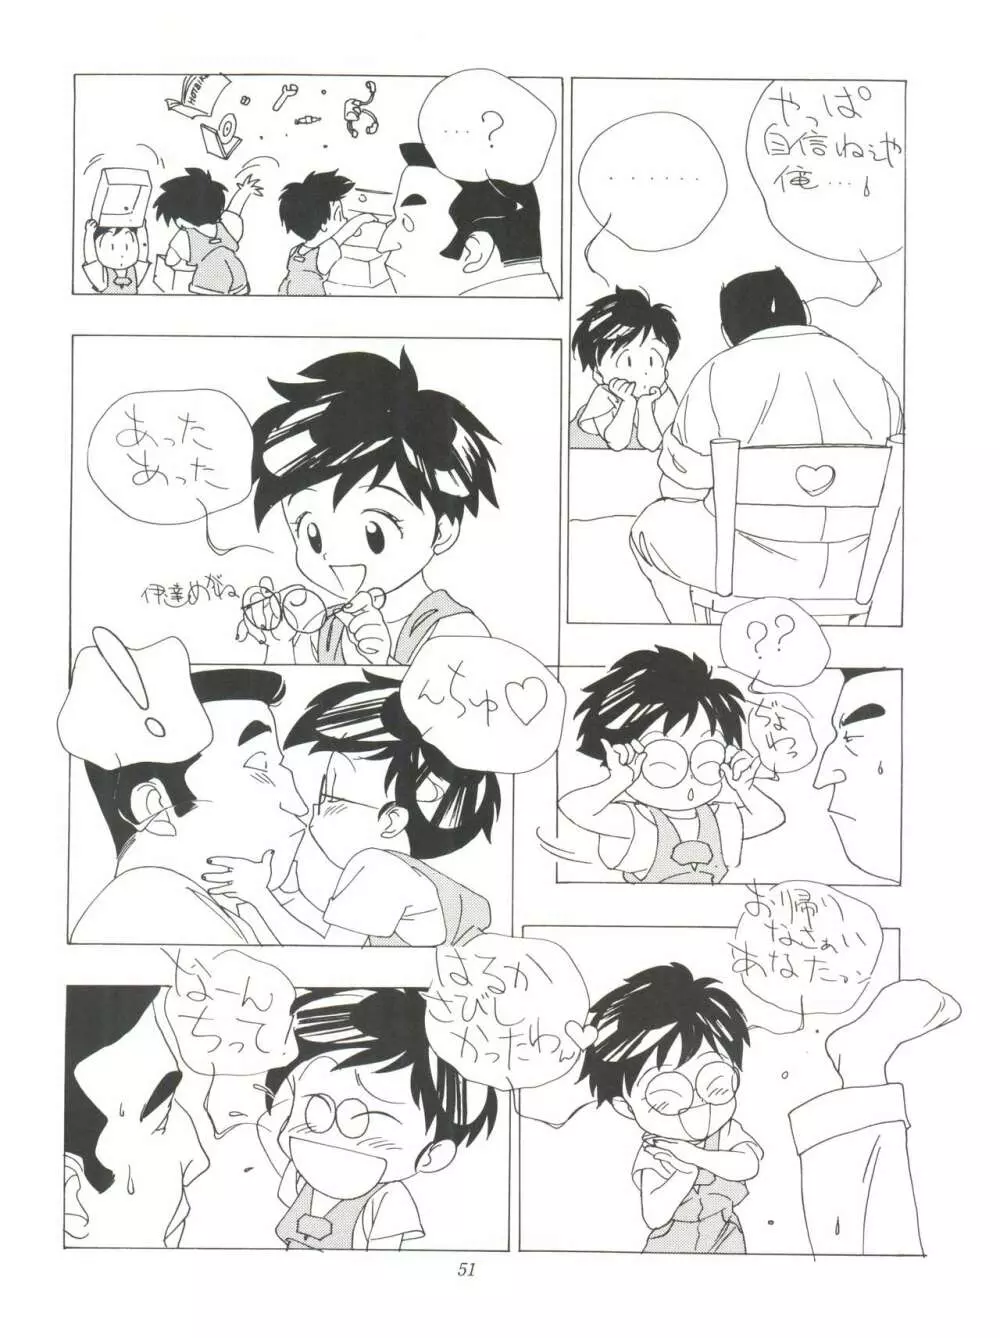 FLY! ISAMI!! - page55